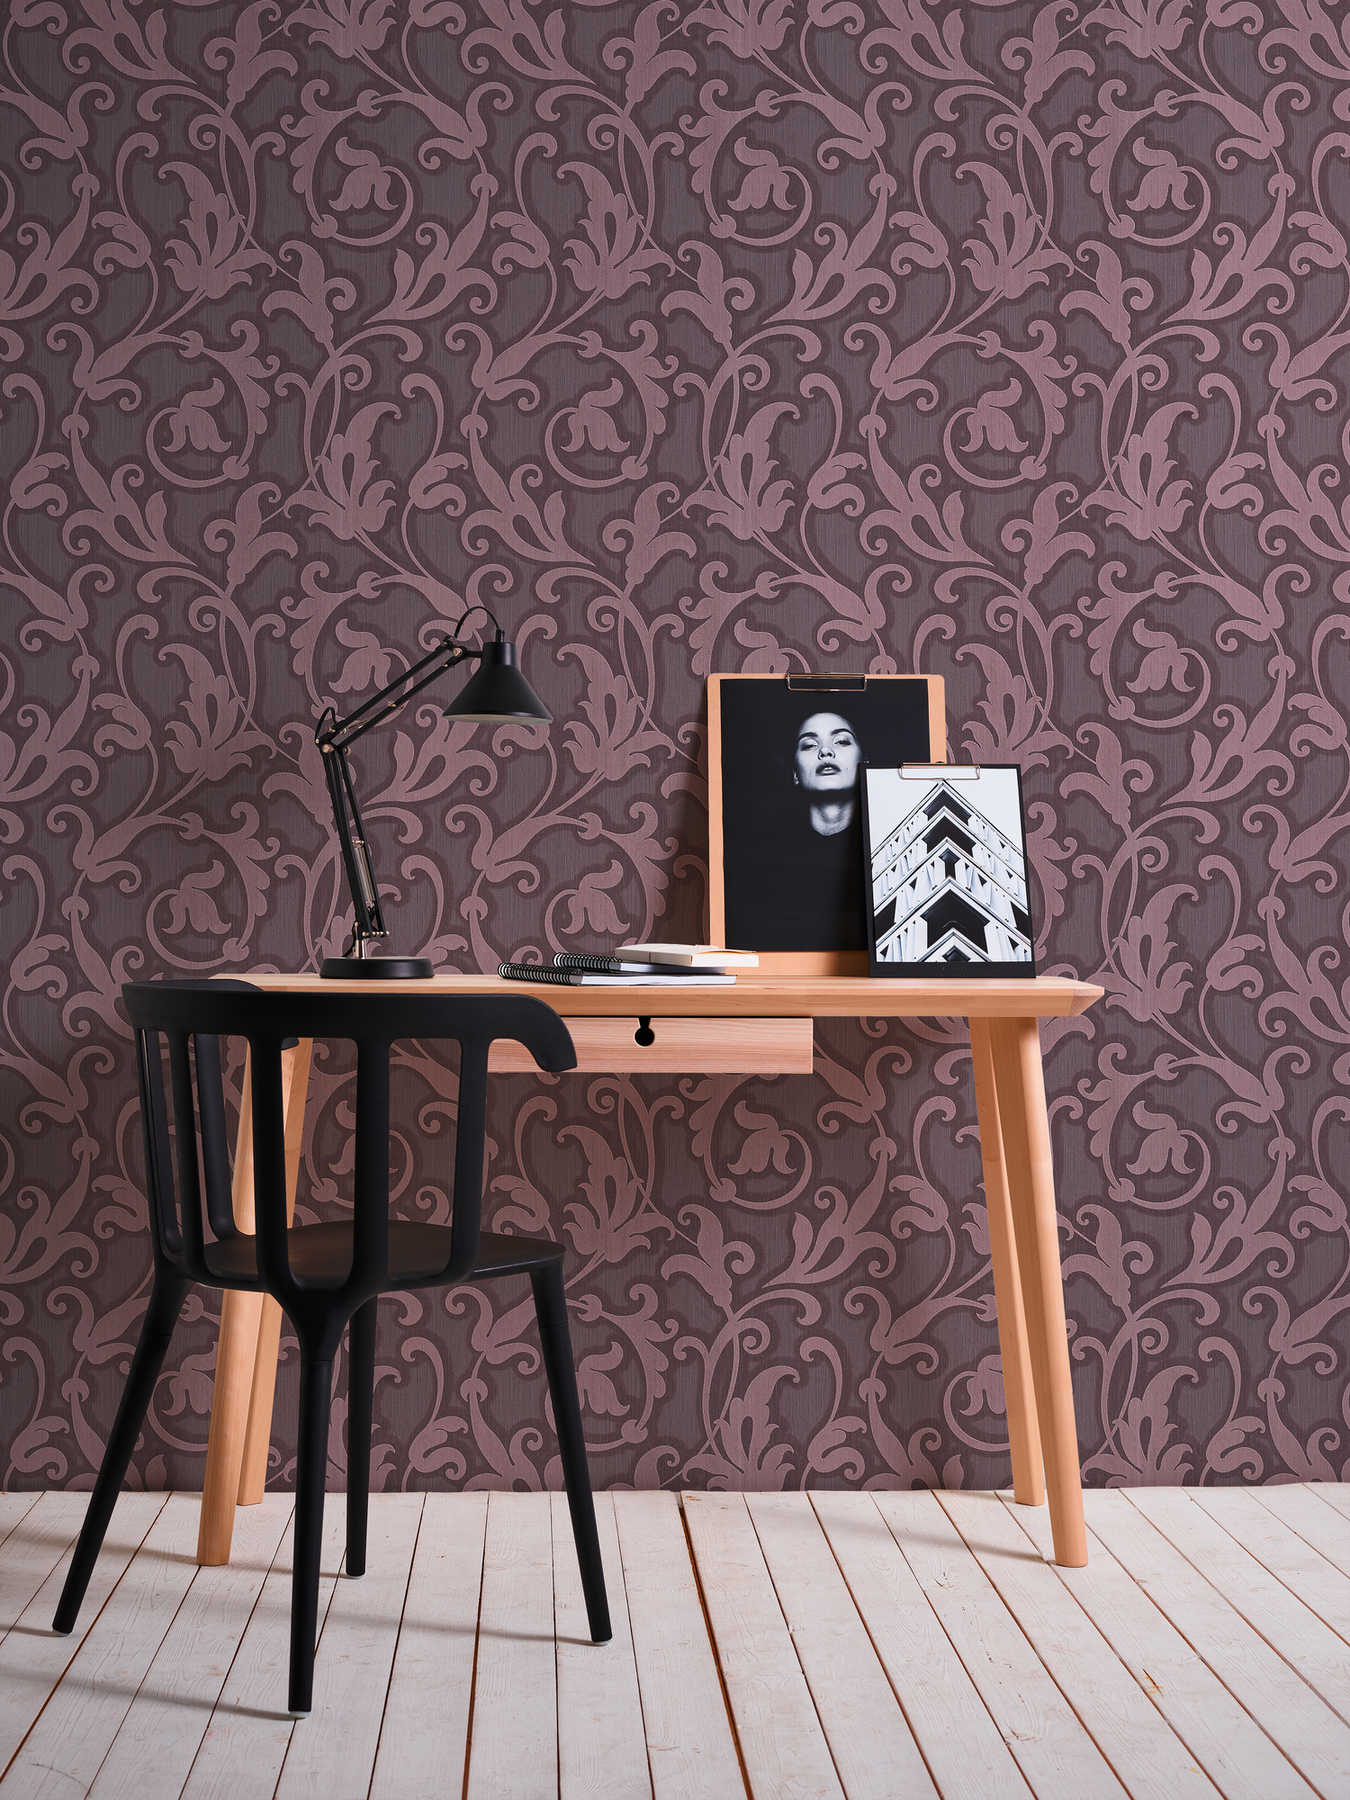             Baroque wallpaper with textile structure & embossed pattern - purple, metallic
        